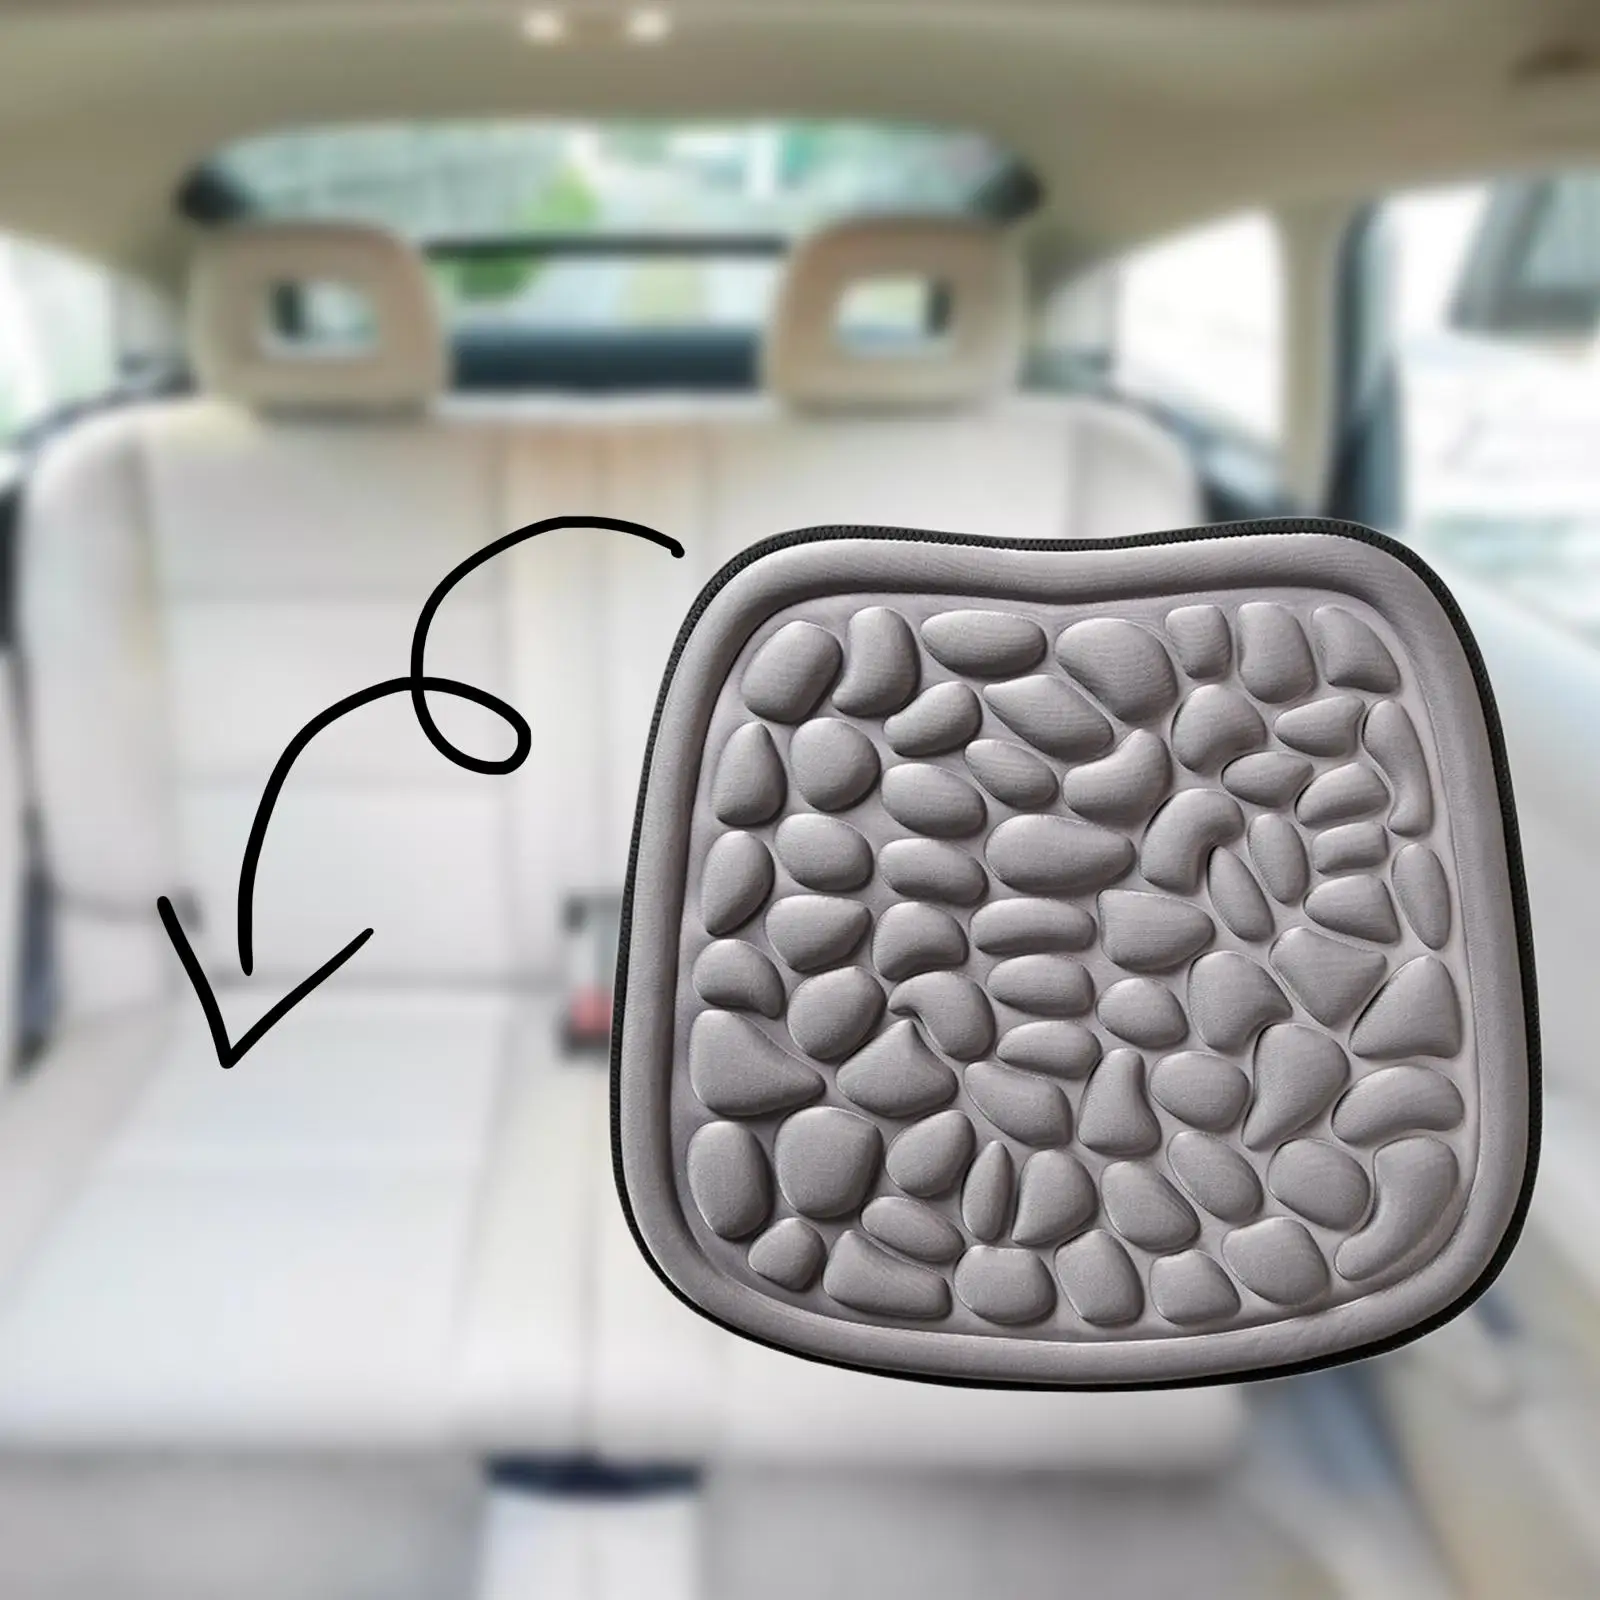 Car Seat Cushion Replaces Spare Parts Ventilation Non Slip Comfortable Auto Seat Cover Mat for Most Vehicles Truck Car SUV